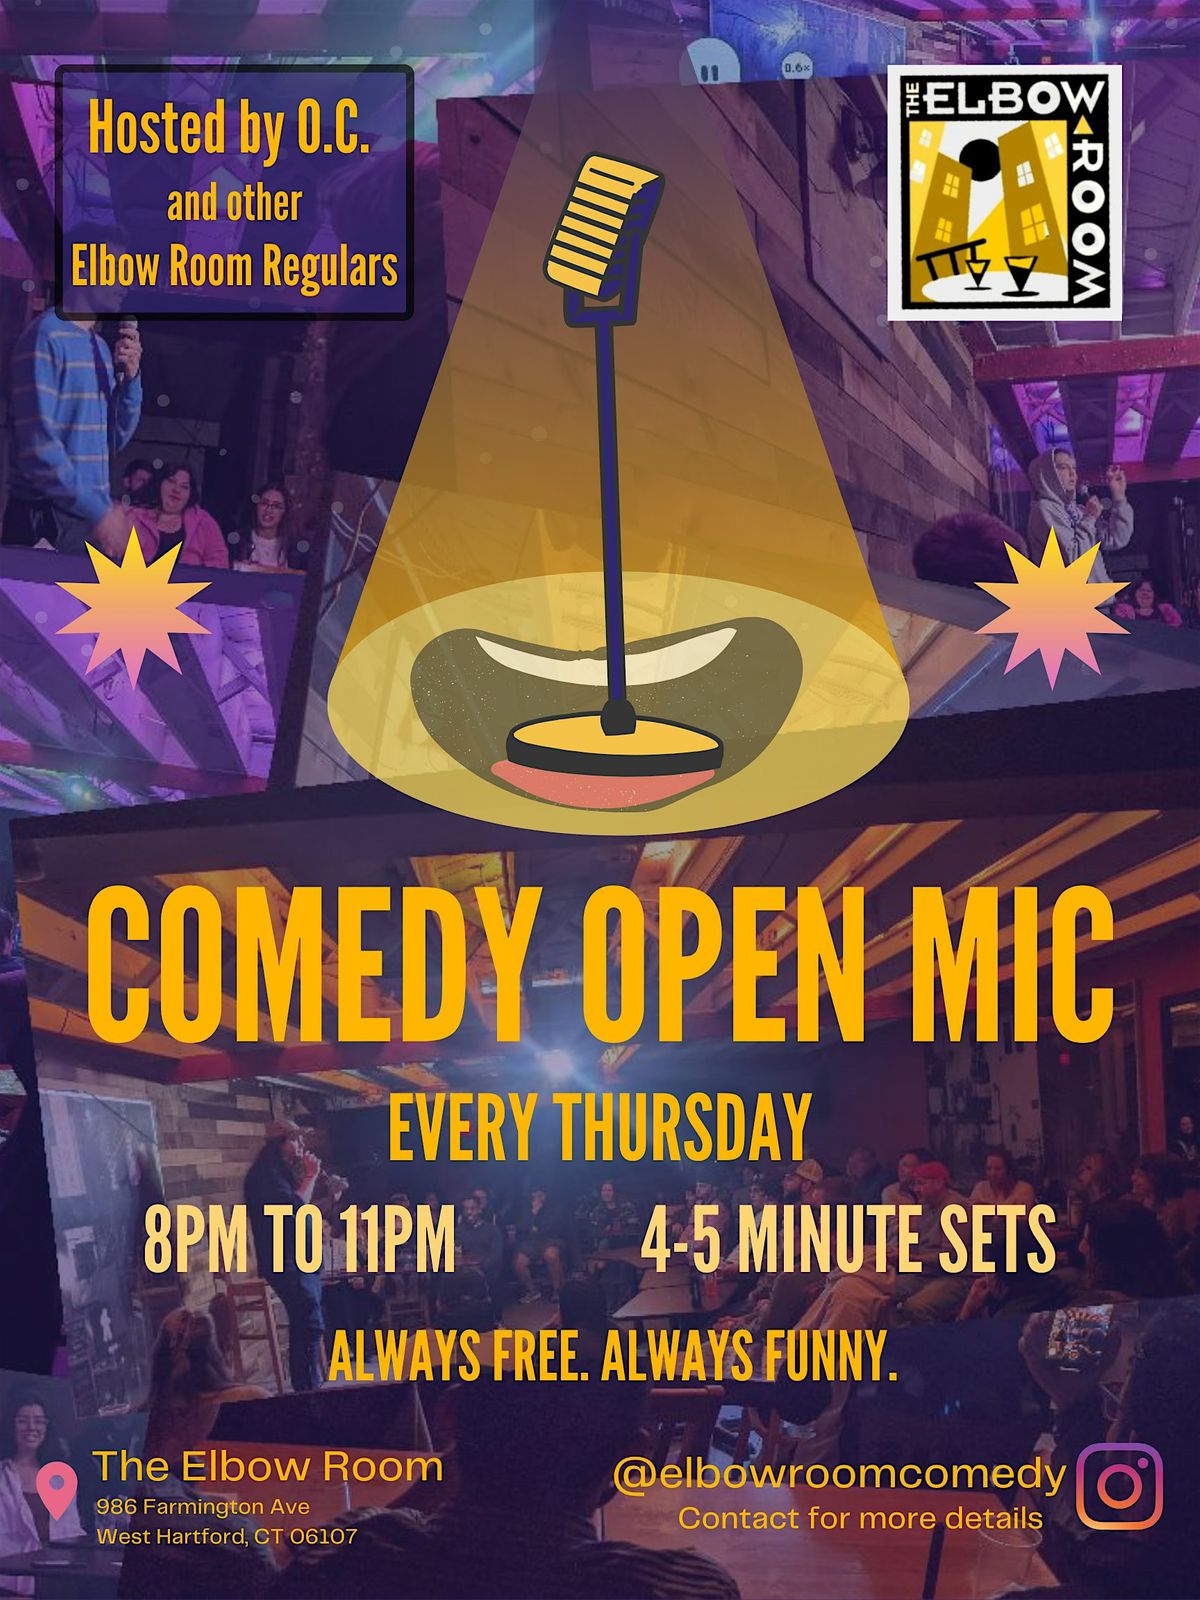 The Elbow Room Comedy Open Mic EVERY THURSDAY